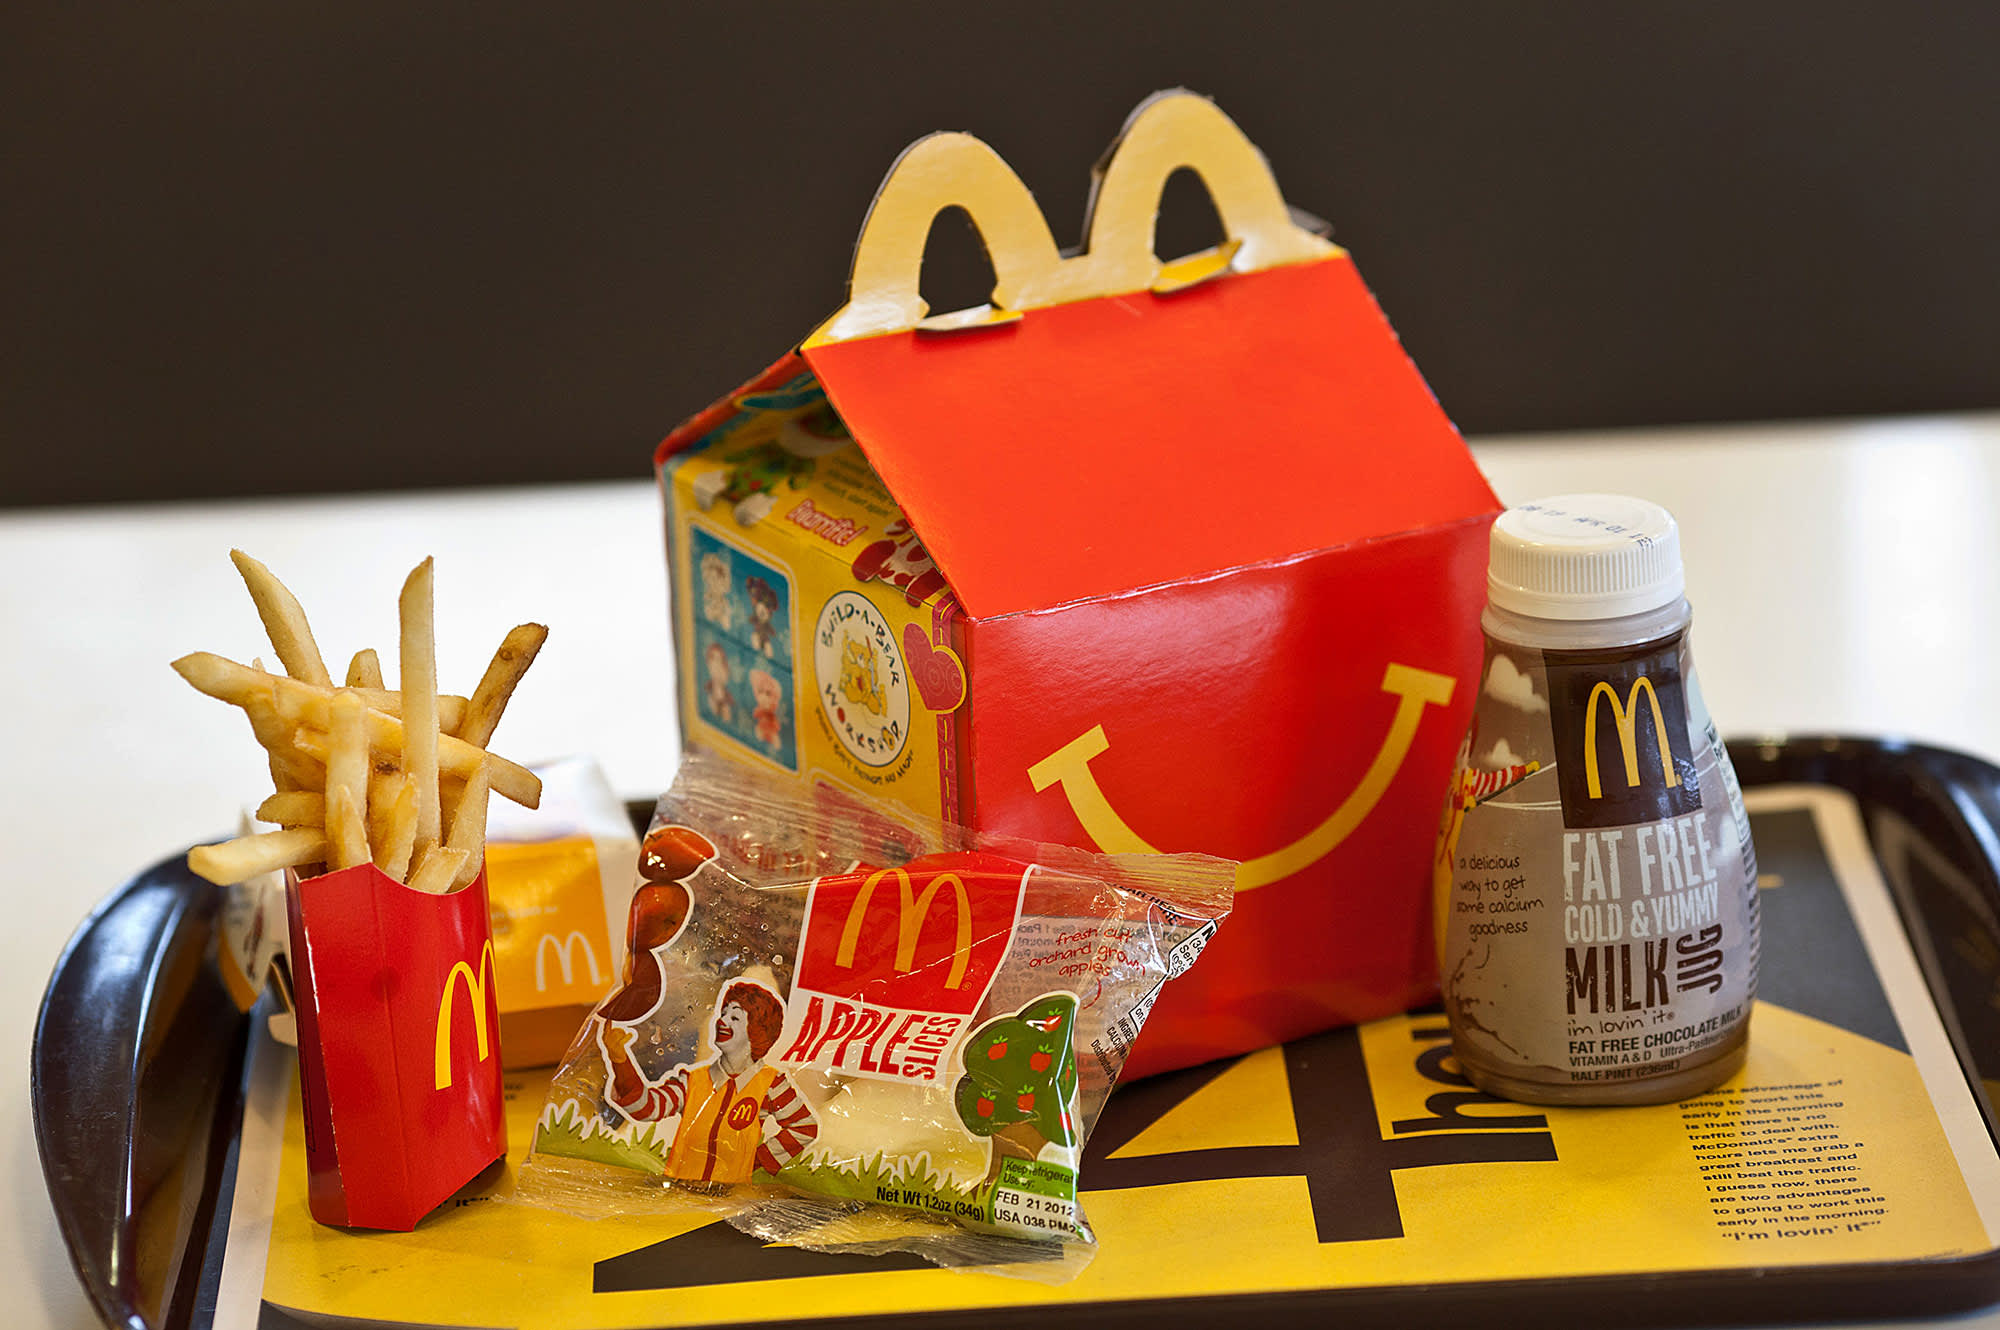 Here's how McDonald's Happy Meals have changed over the years